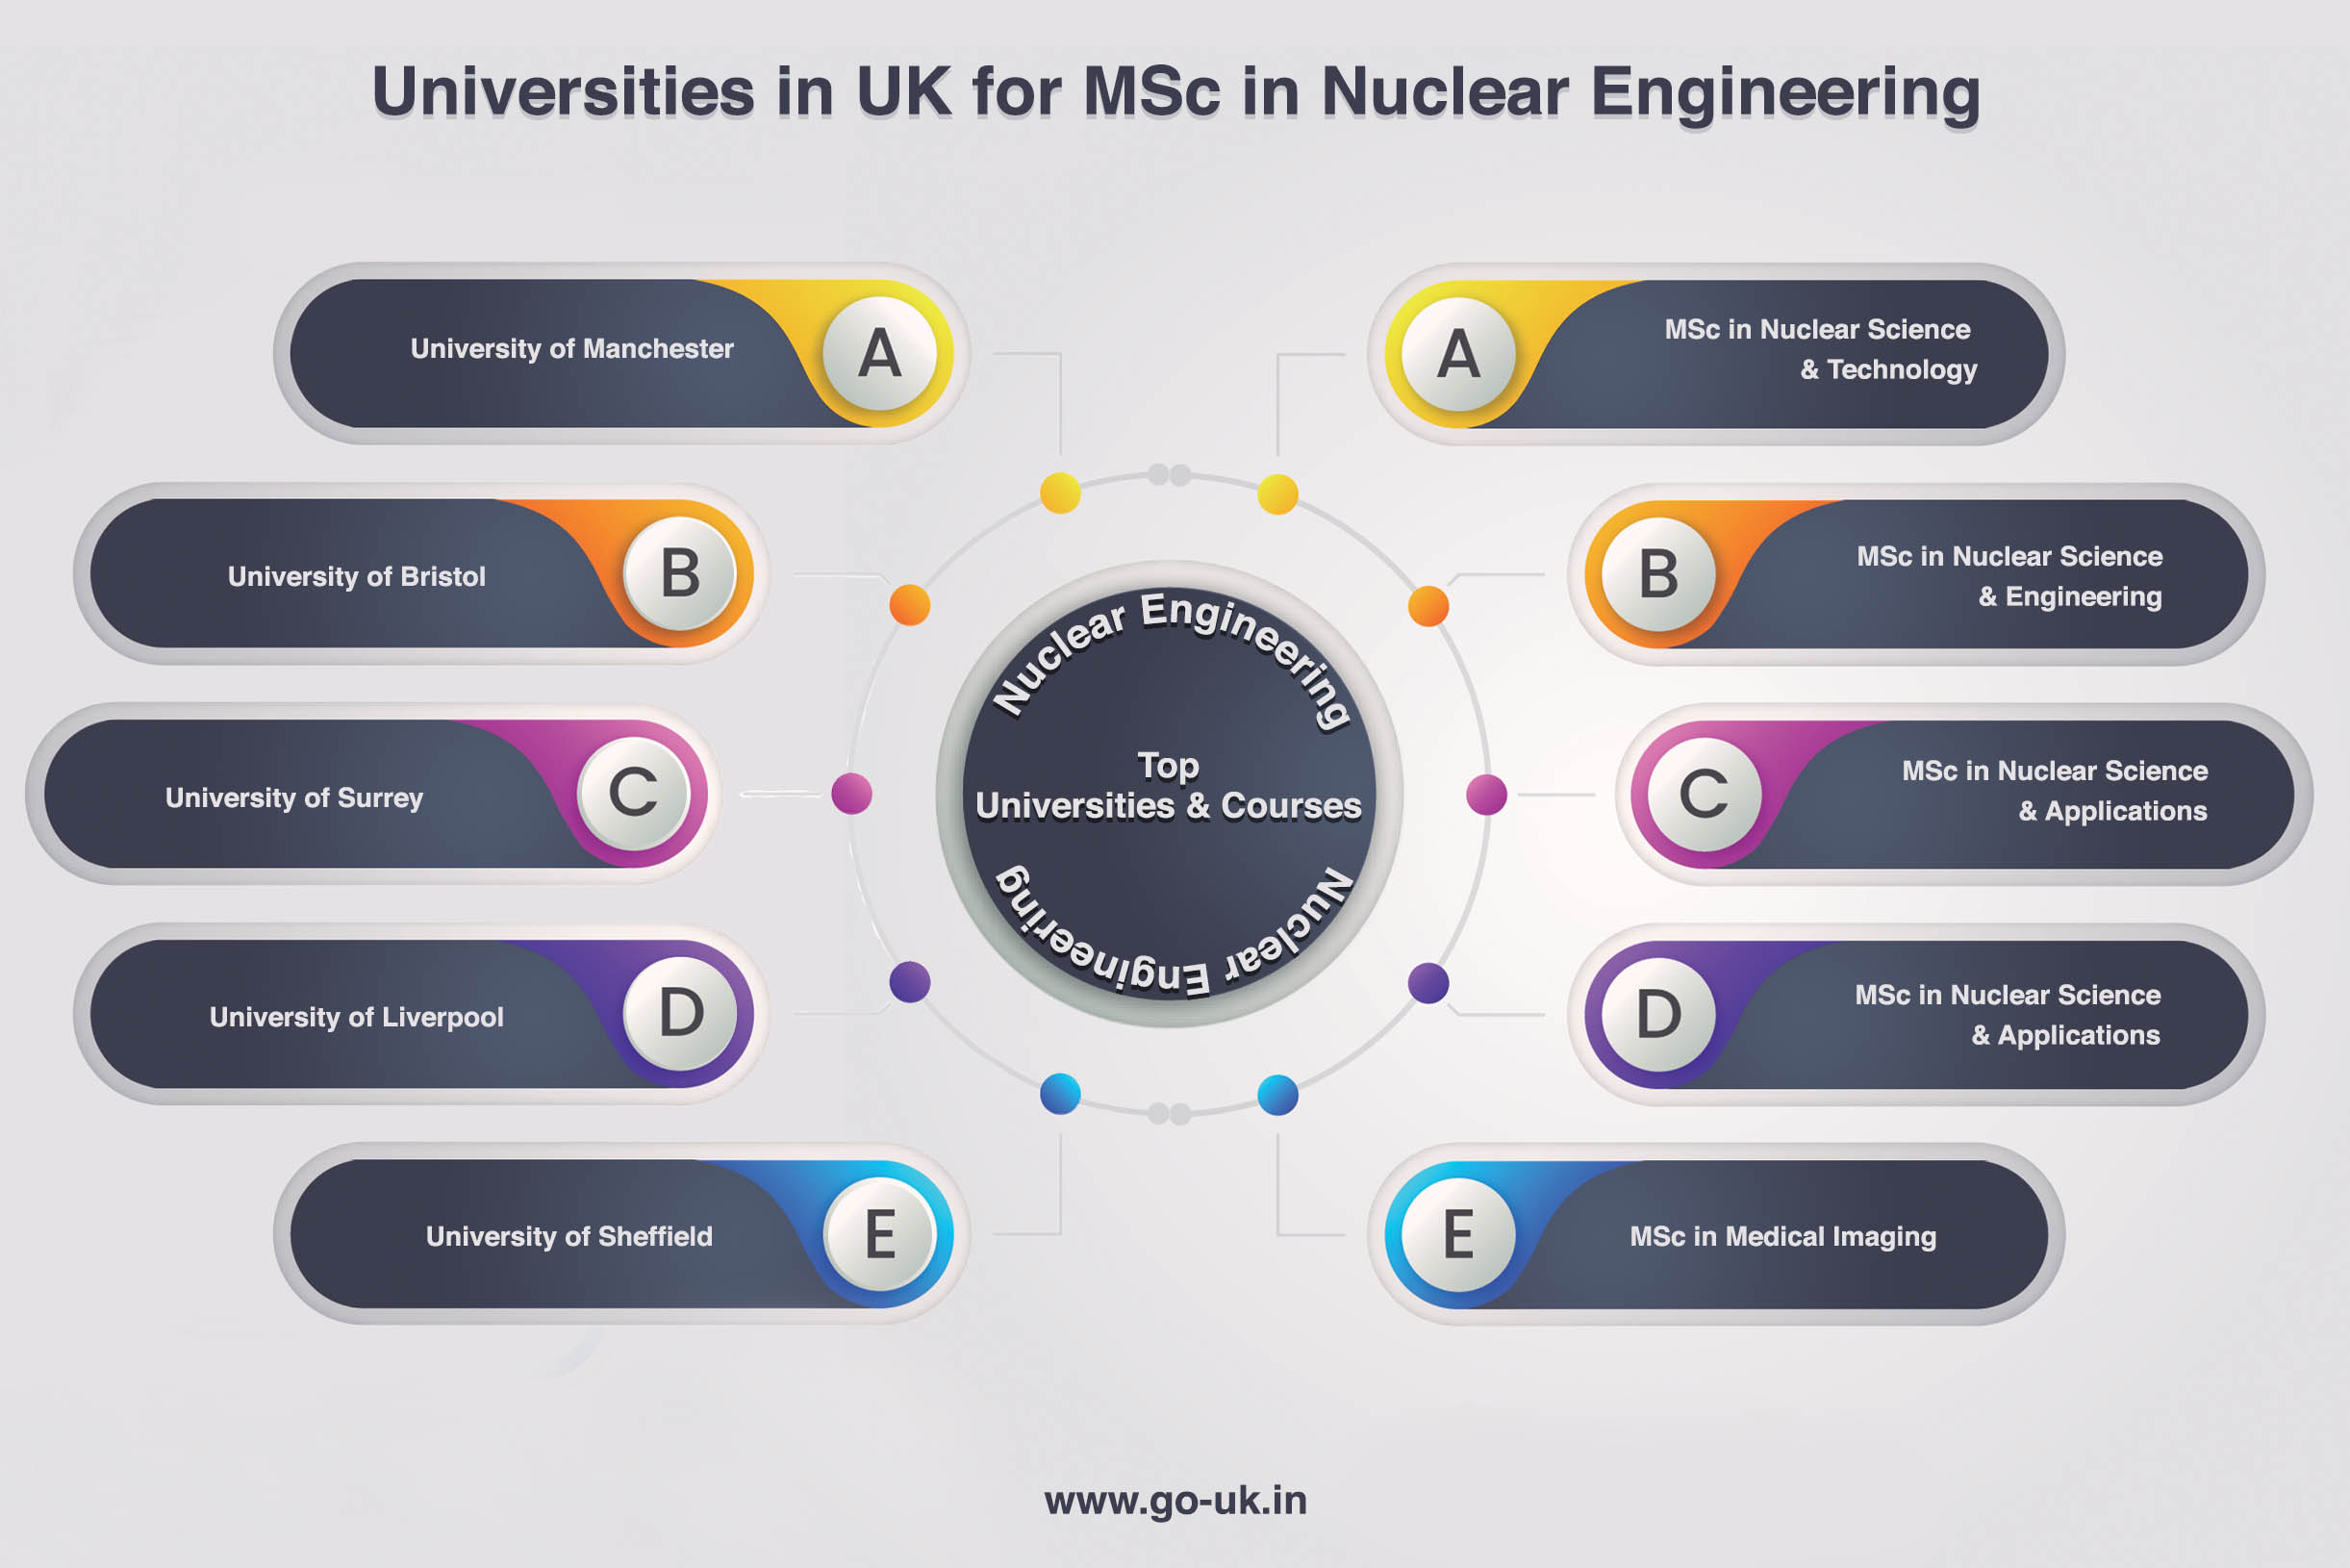 Universities in UK for MSc in Nuclear Engineering